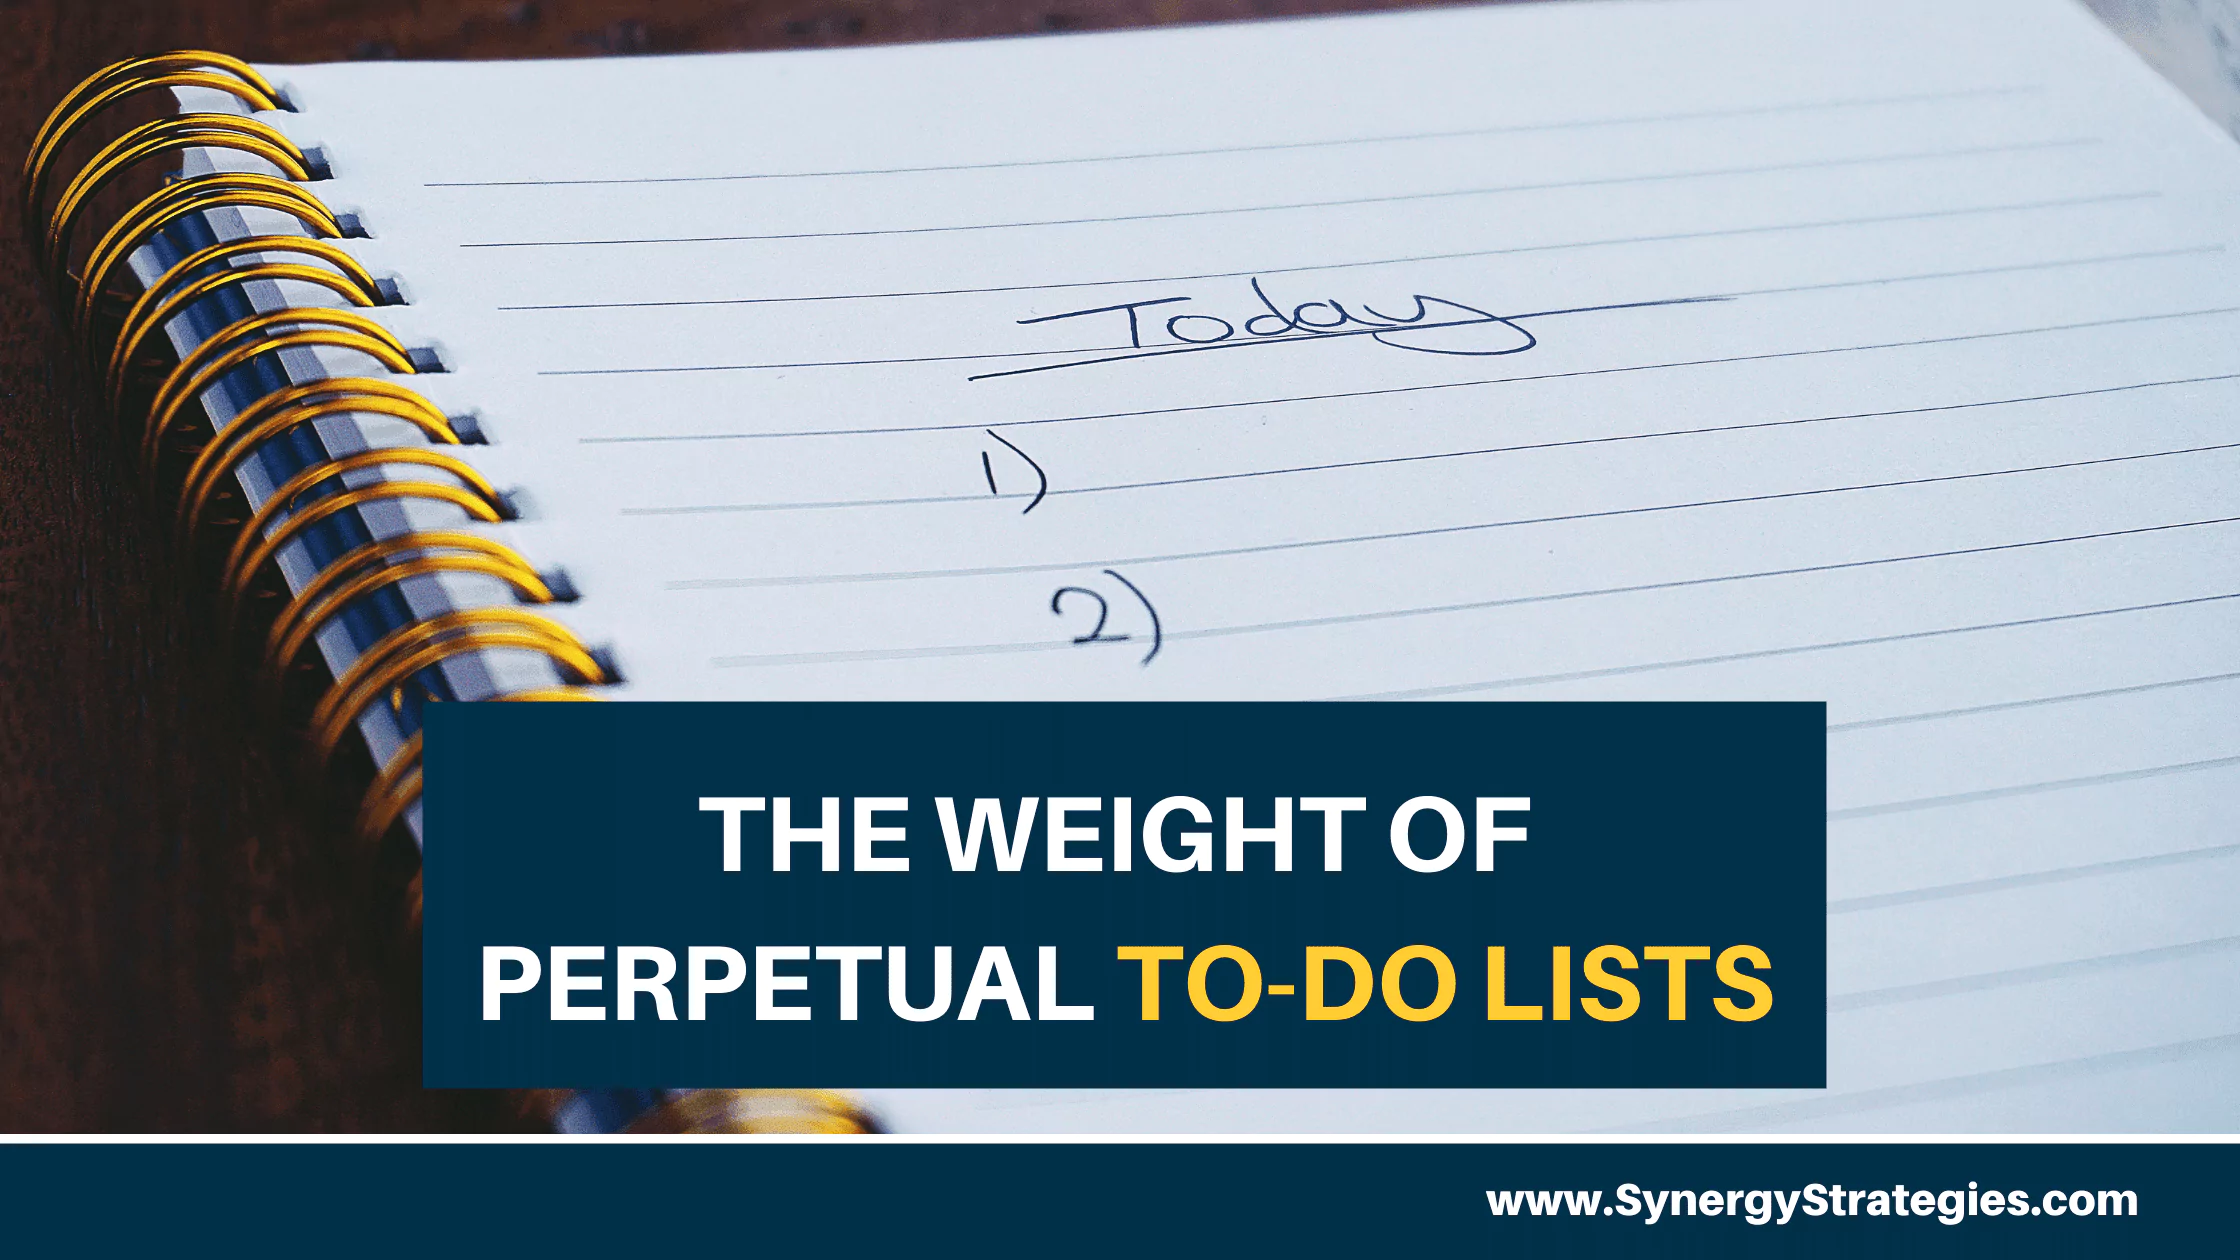 THE WEIGHT OF PERPETUAL TO-DO LISTS